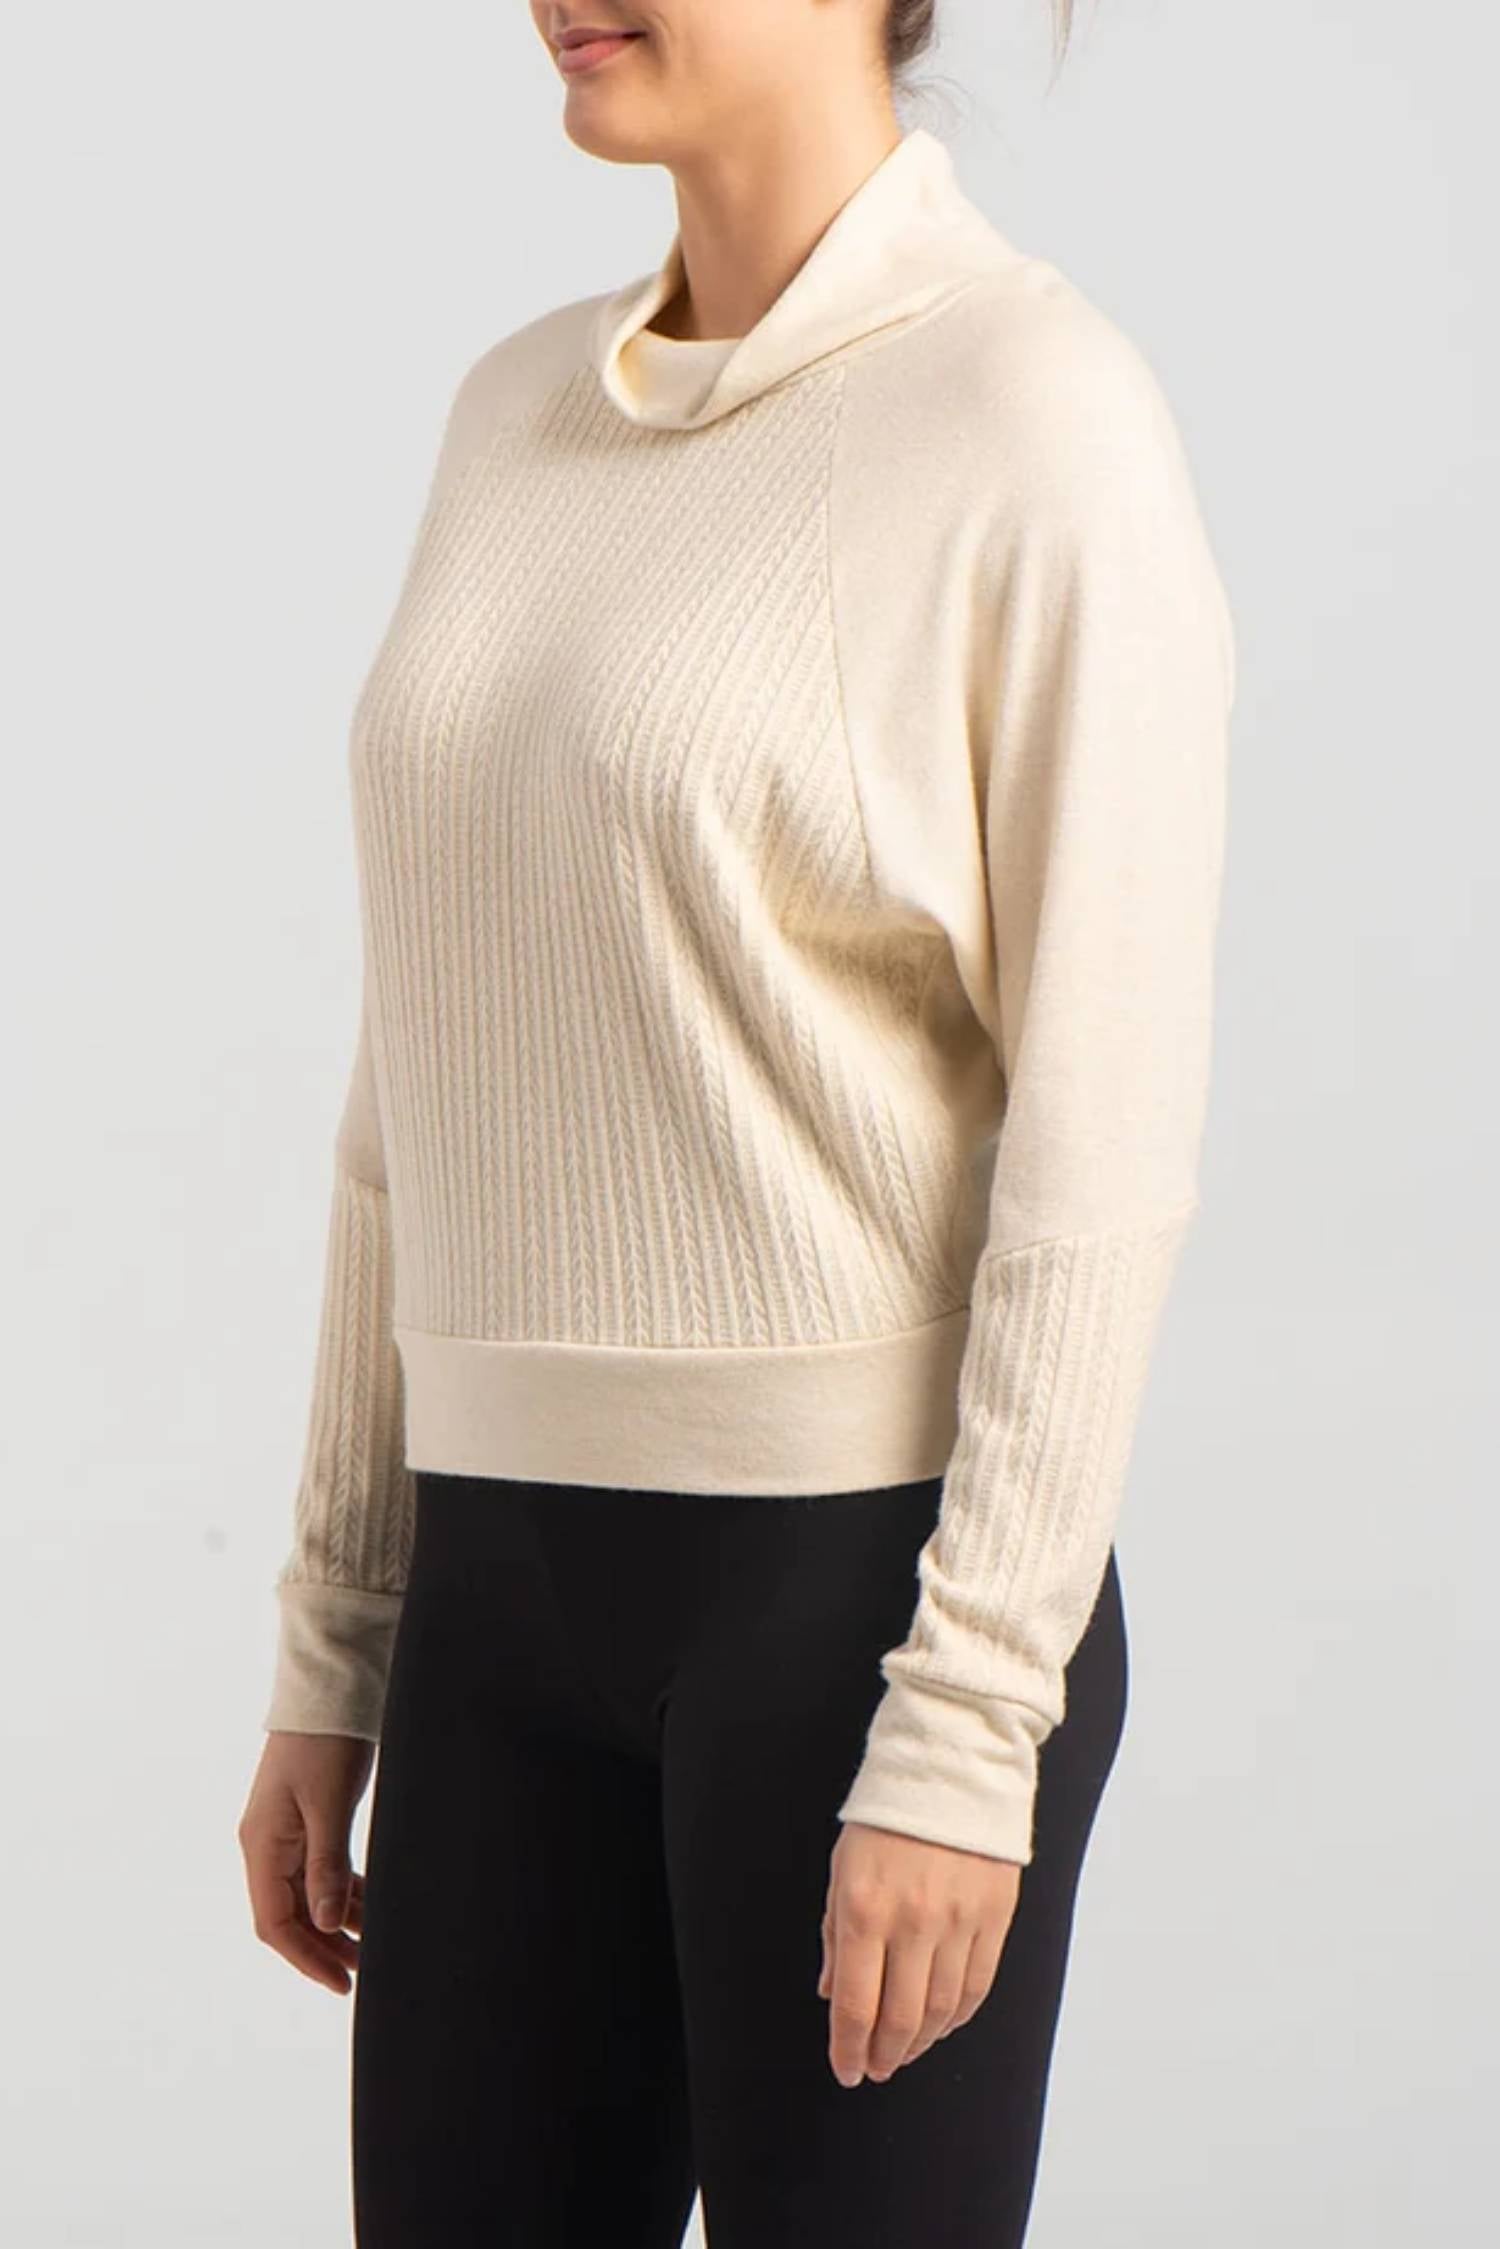 Seth Sweater by Kollontai, Cream, cowl neck, raglan sleeves, fine cable knit on lower sleeves and front, hip length, sizes XS to XXL, made in Montreal